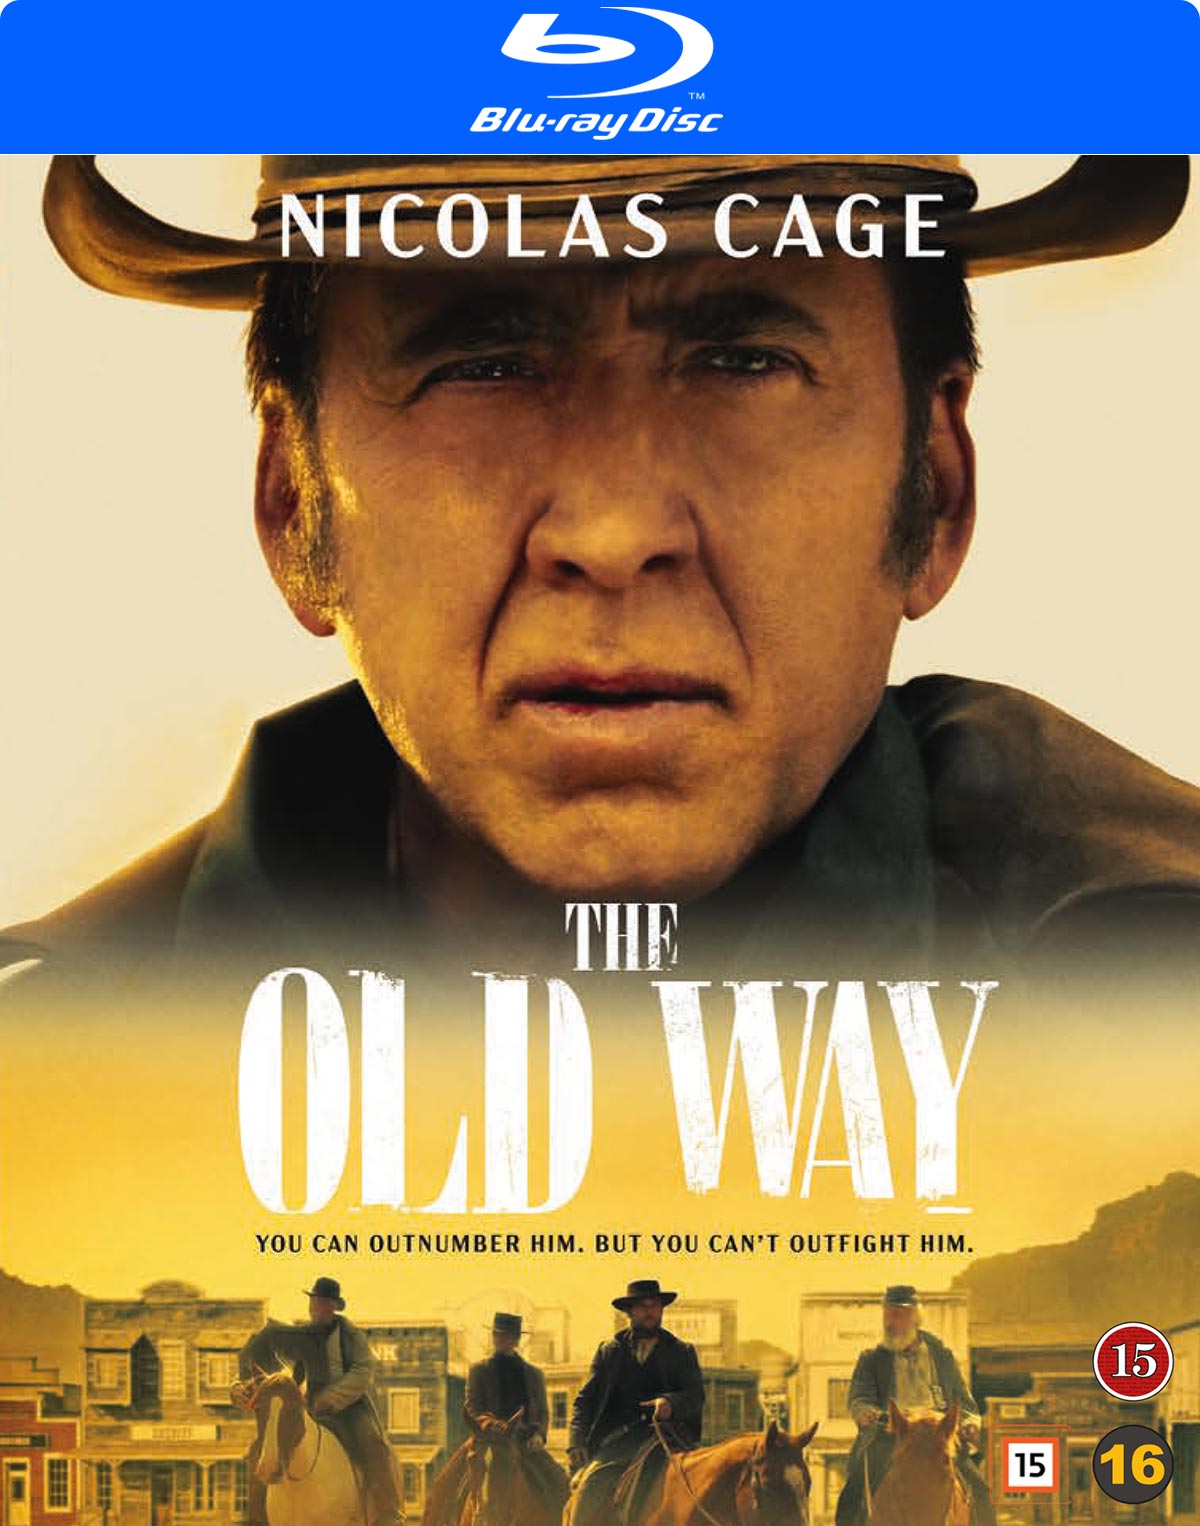 The old way (Bluray) film